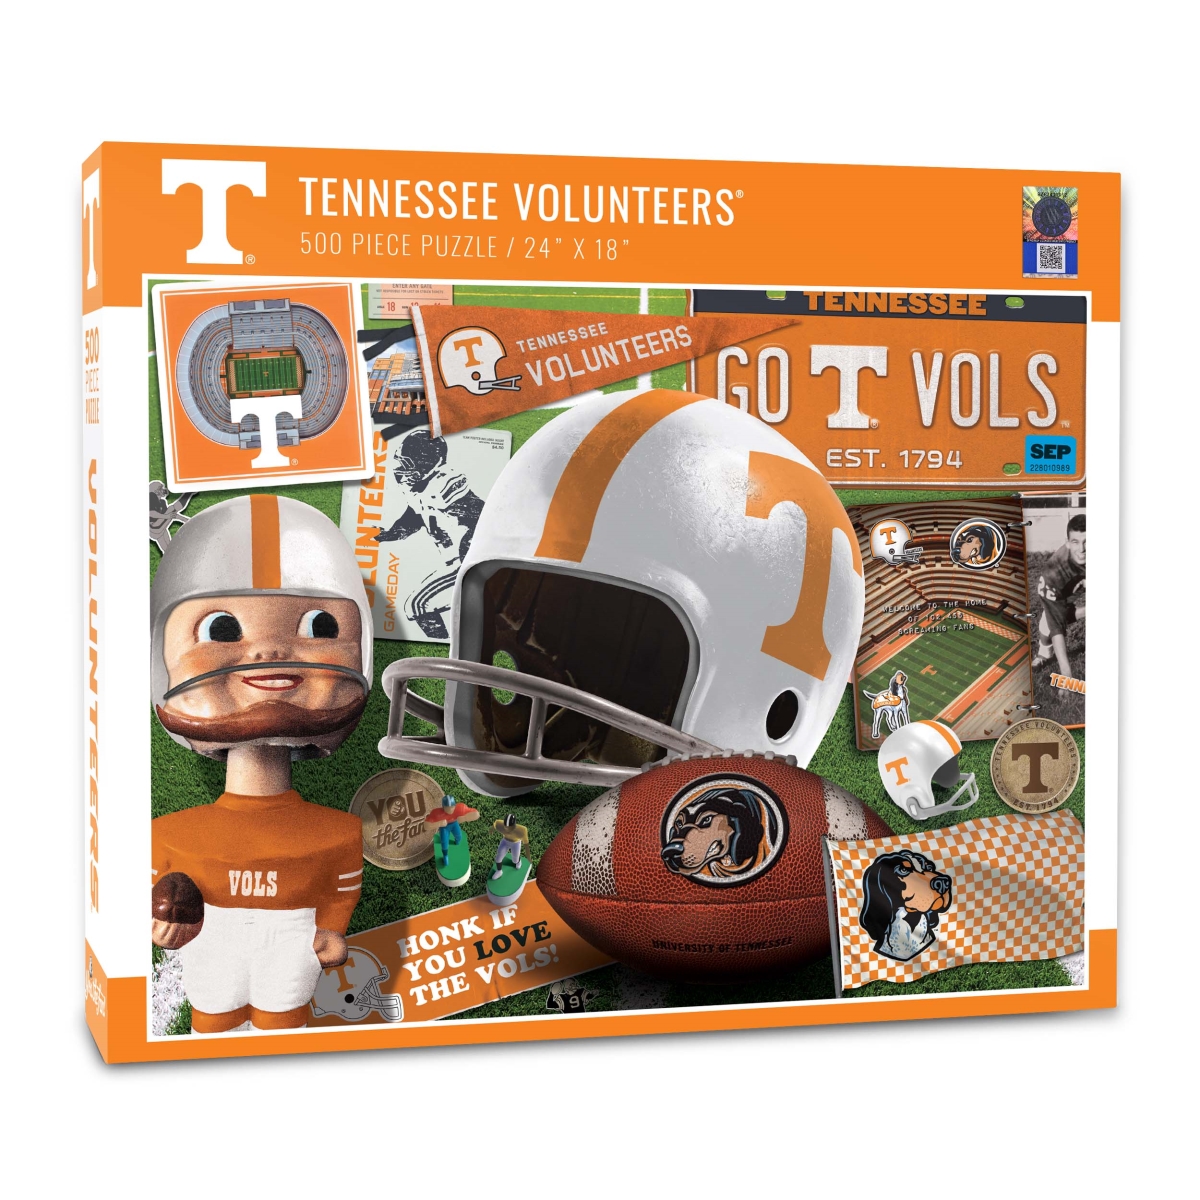 Picture of YouTheFan 0950189 18 x 24 in. NCAA Tennessee Volunteers Retro Series Puzzle - 500 Piece